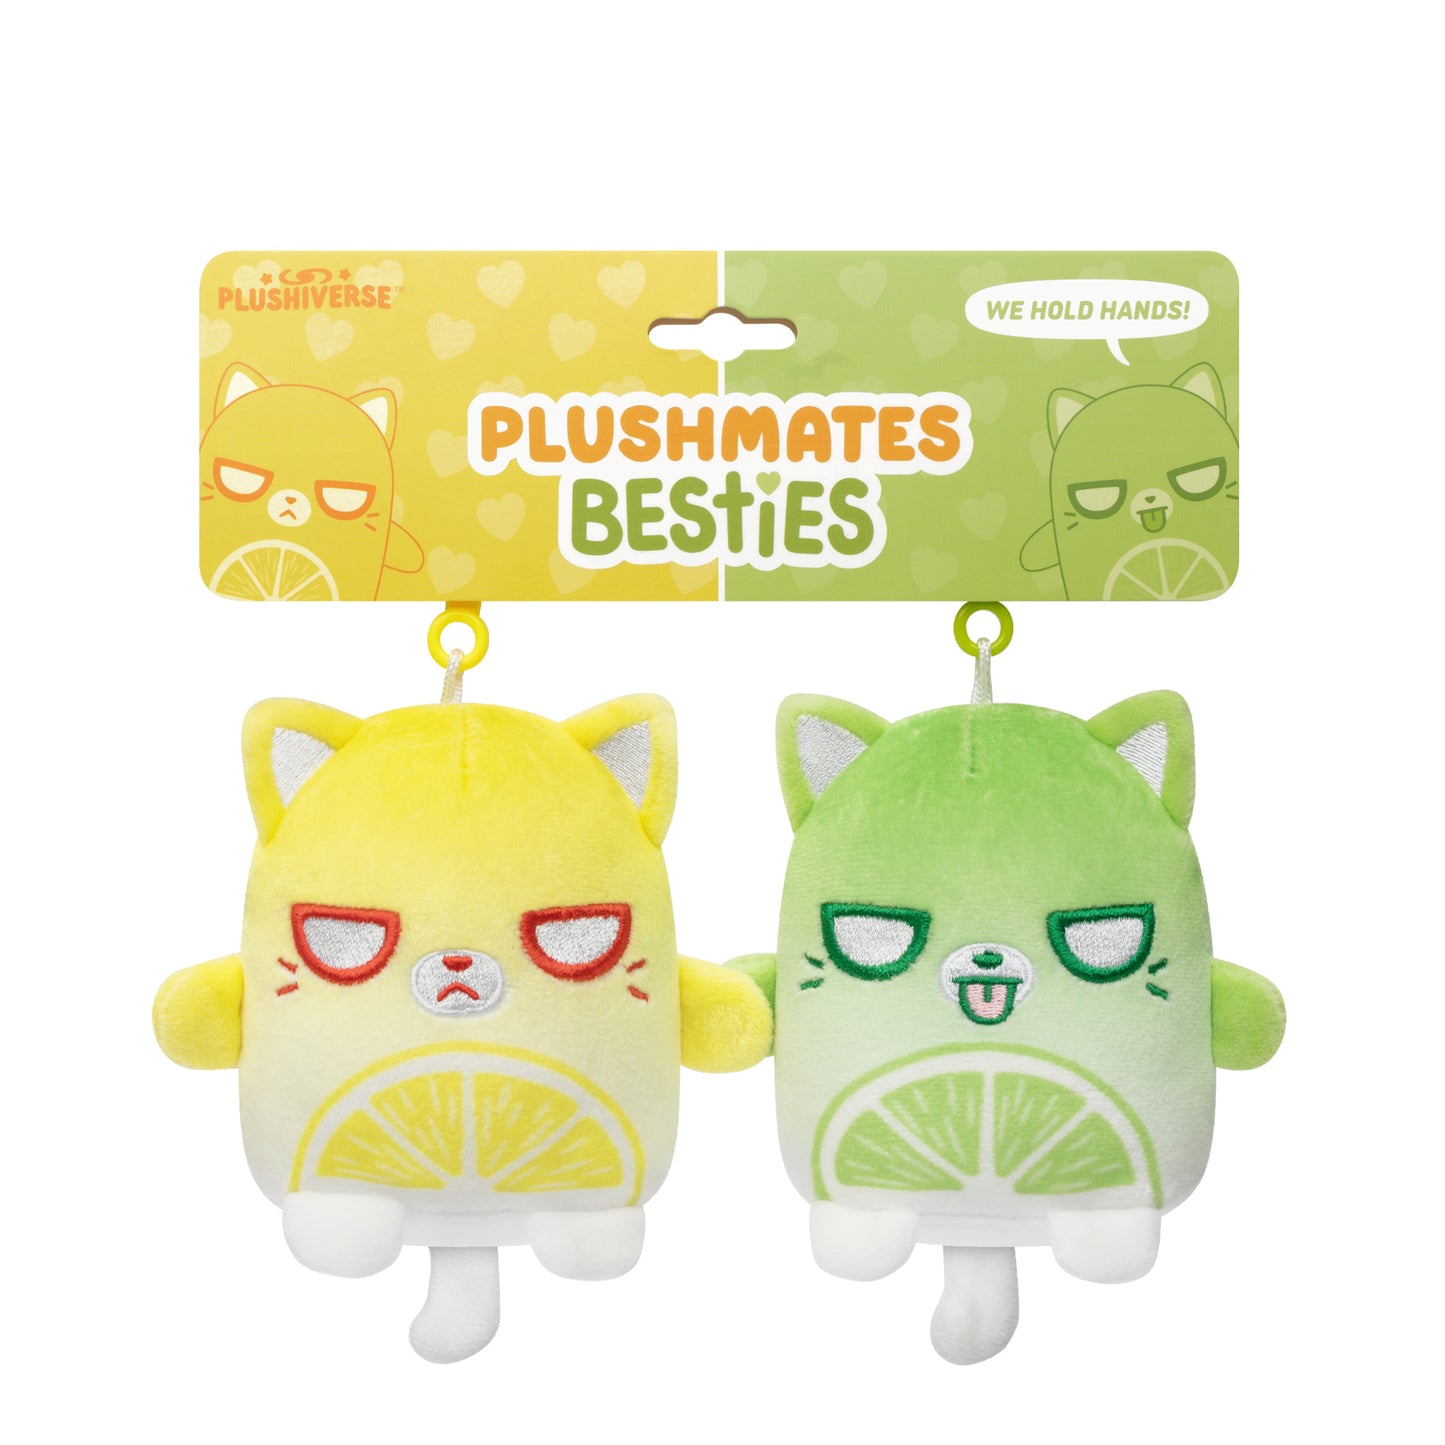 Two Plushiverse Sourpuss Plushmates Besties in a package with lemons on them, perfect as bag charms by TeeTurtle.